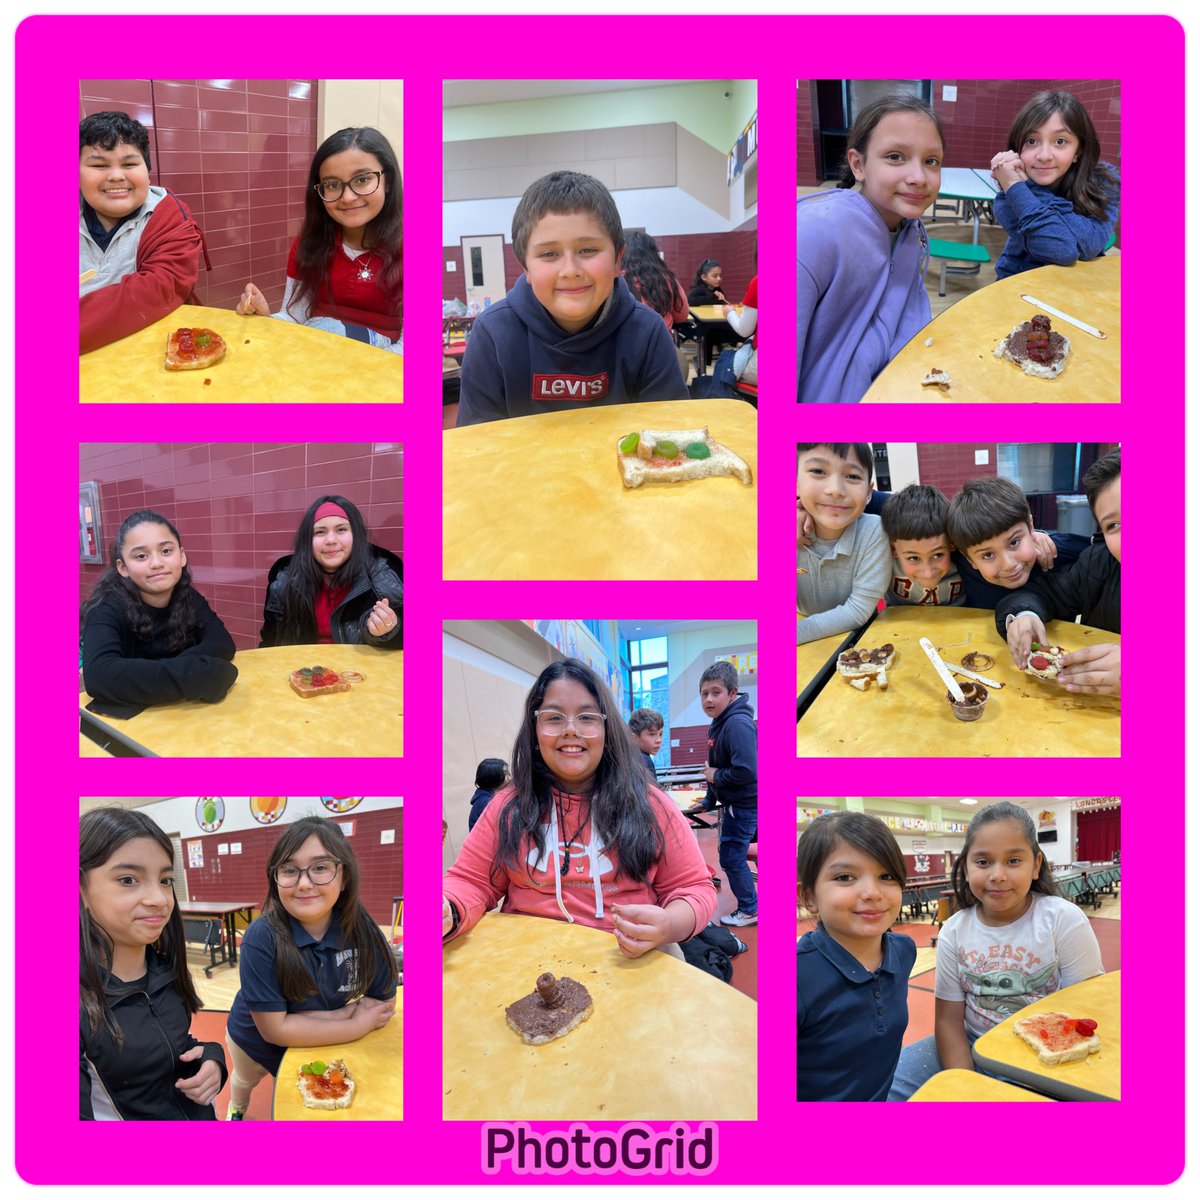 Fabulous Friday with Formation of Fossil Fuels. Student created coring tools and Sedimentary samples. Oh, how fun 🤩 And.. yummy 😋 @PK8Academics @YsletaISD @zeila_wittke @JMadrid_YISD @ValChavez2018